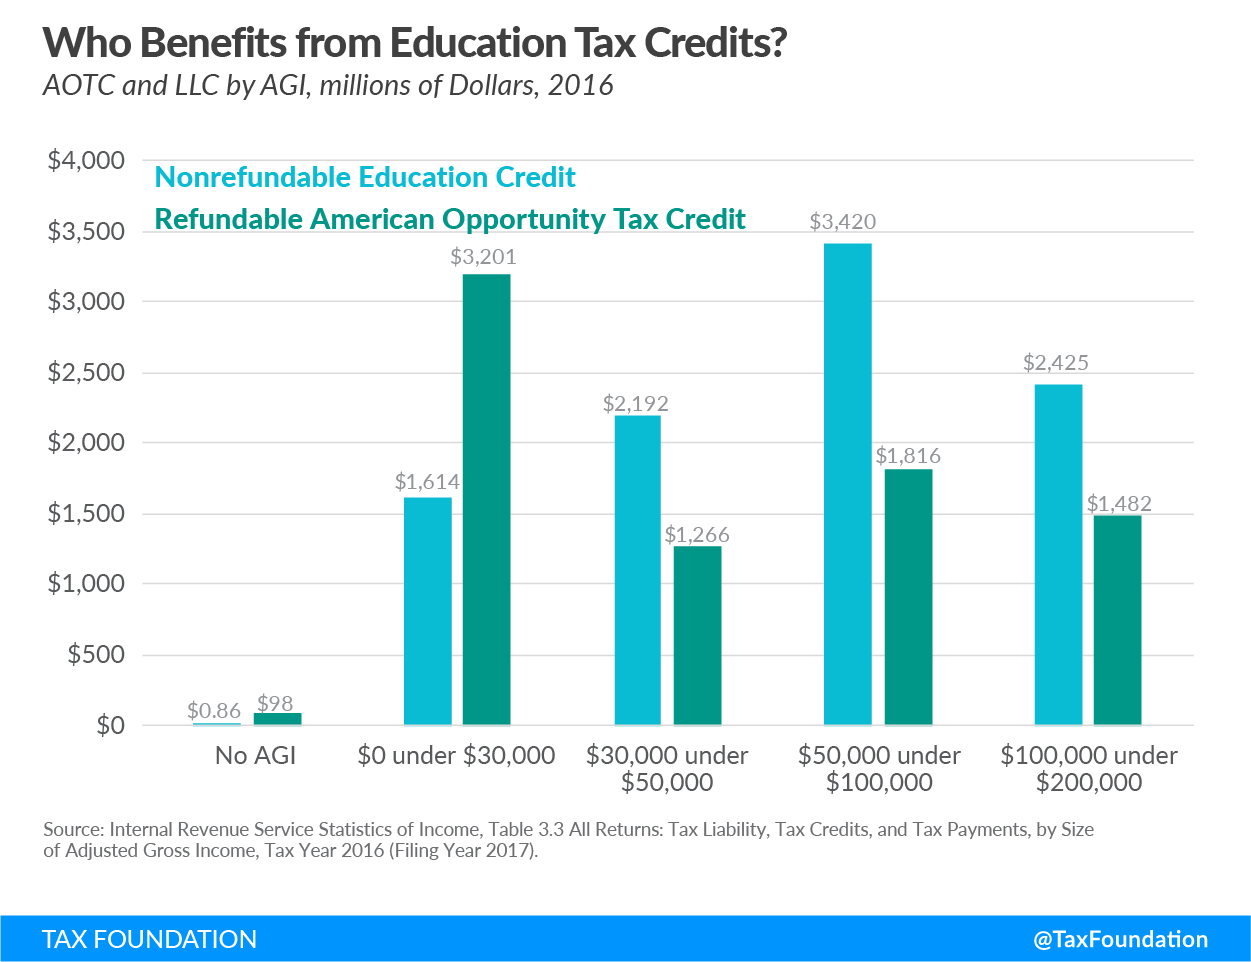 Who benefits from education credits?